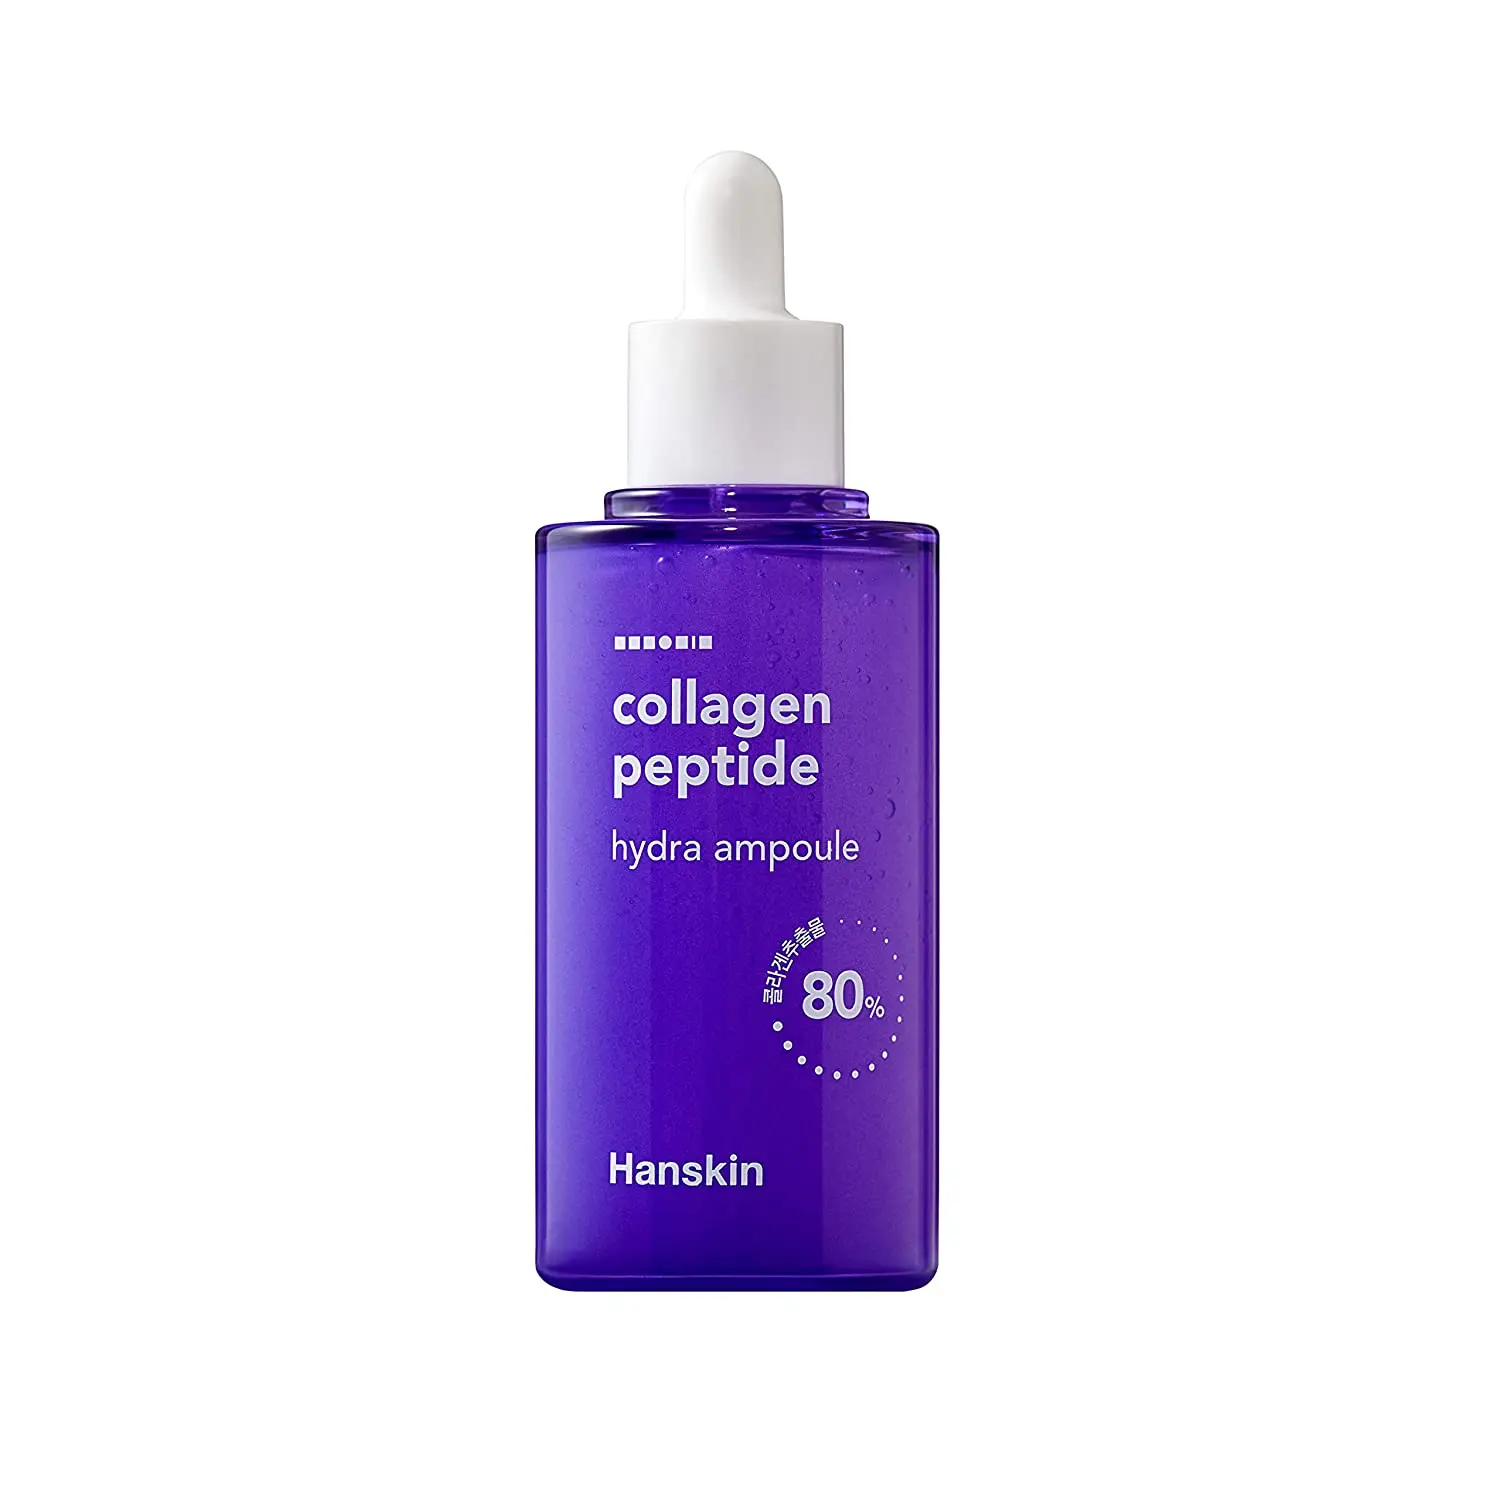 

80% Collagen Extract and 20% Peptide Anti-Aging Hhyaluronic acids Serum In Korea Hanskin Collagen Peptide Hydra Ampoule 90ml